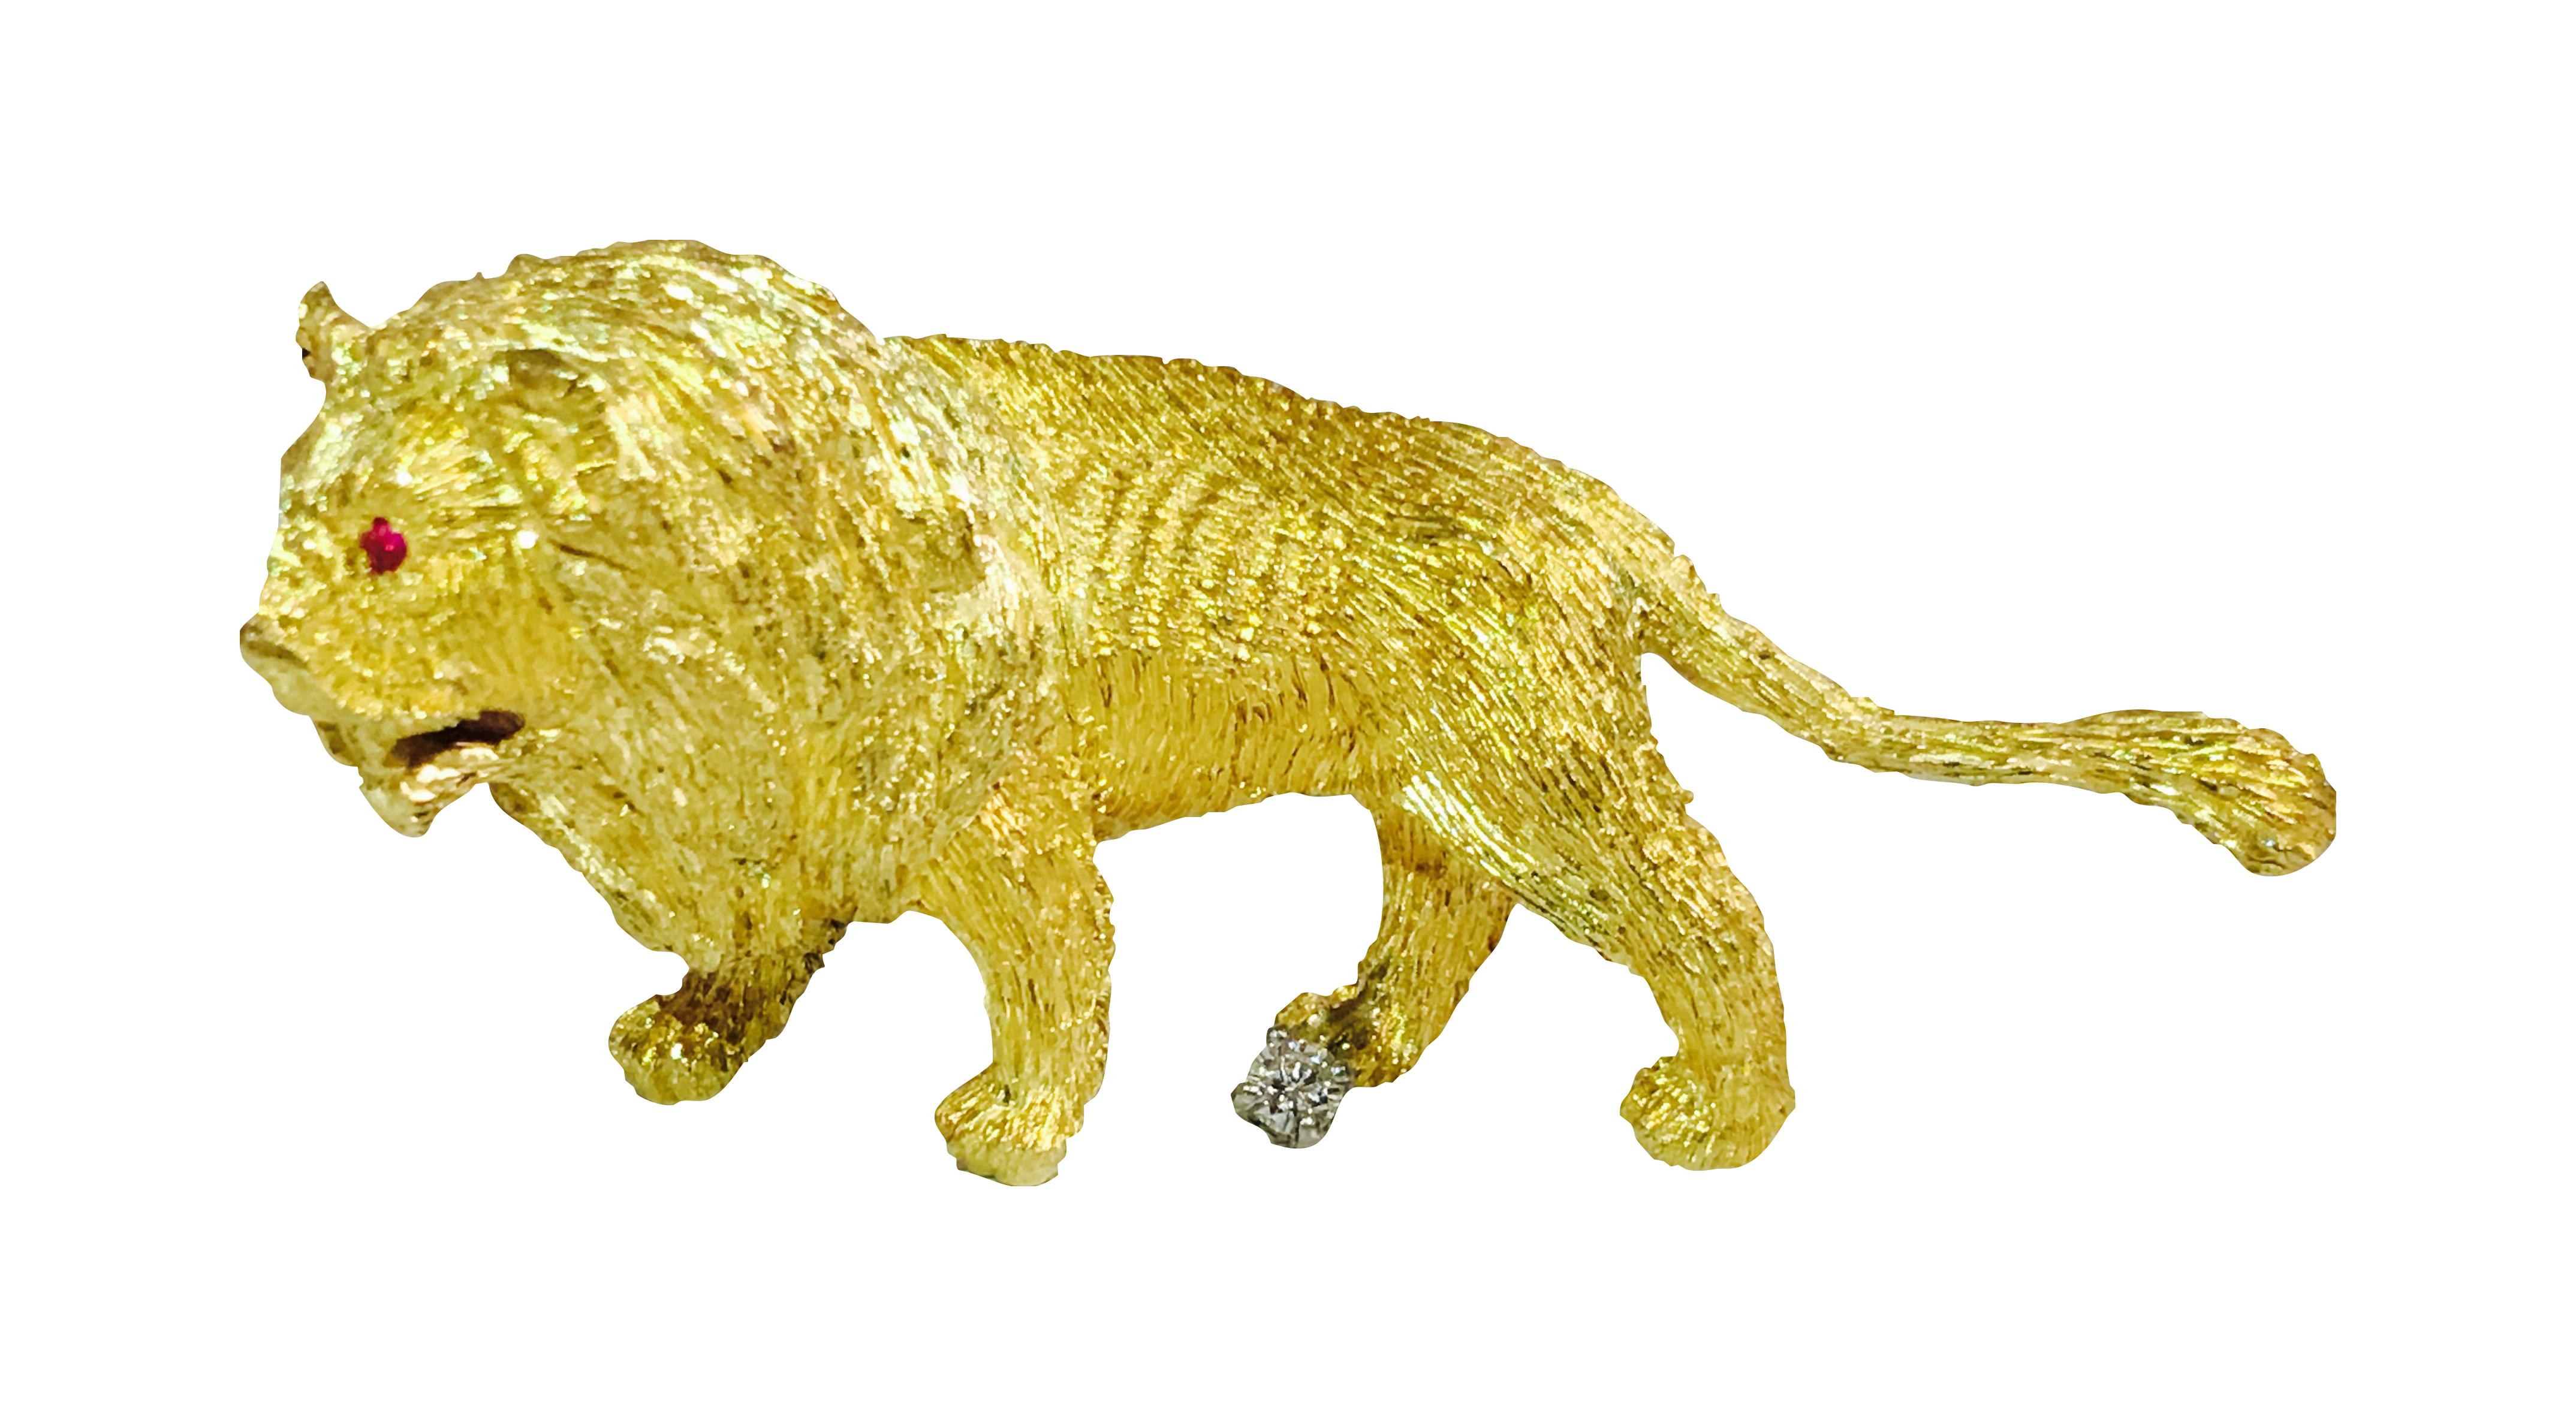 In 18K yellow gold and platinum, this exquisite LION pin features a 0.09 carat diamond and ruby, showcasing tremendous work and superb detail. Ideal for both men and women, this piece epitomizes exquisite craftsmanship and timeless elegance.

Key